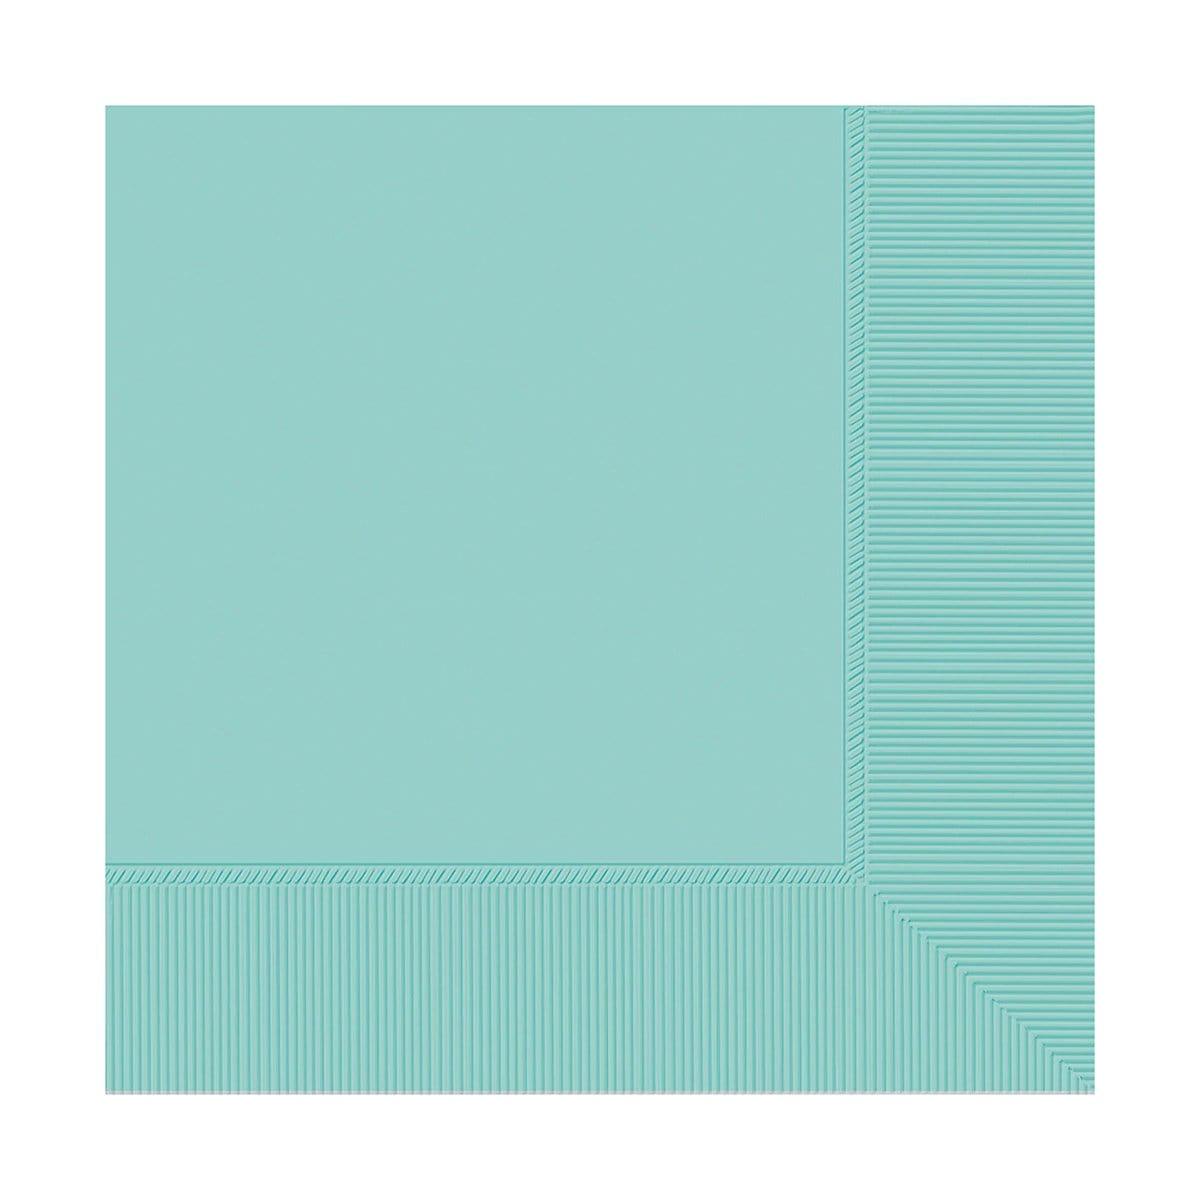 Buy plasticware Robin's Egg Blue Beverage Napkins, 40 Count sold at Party Expert